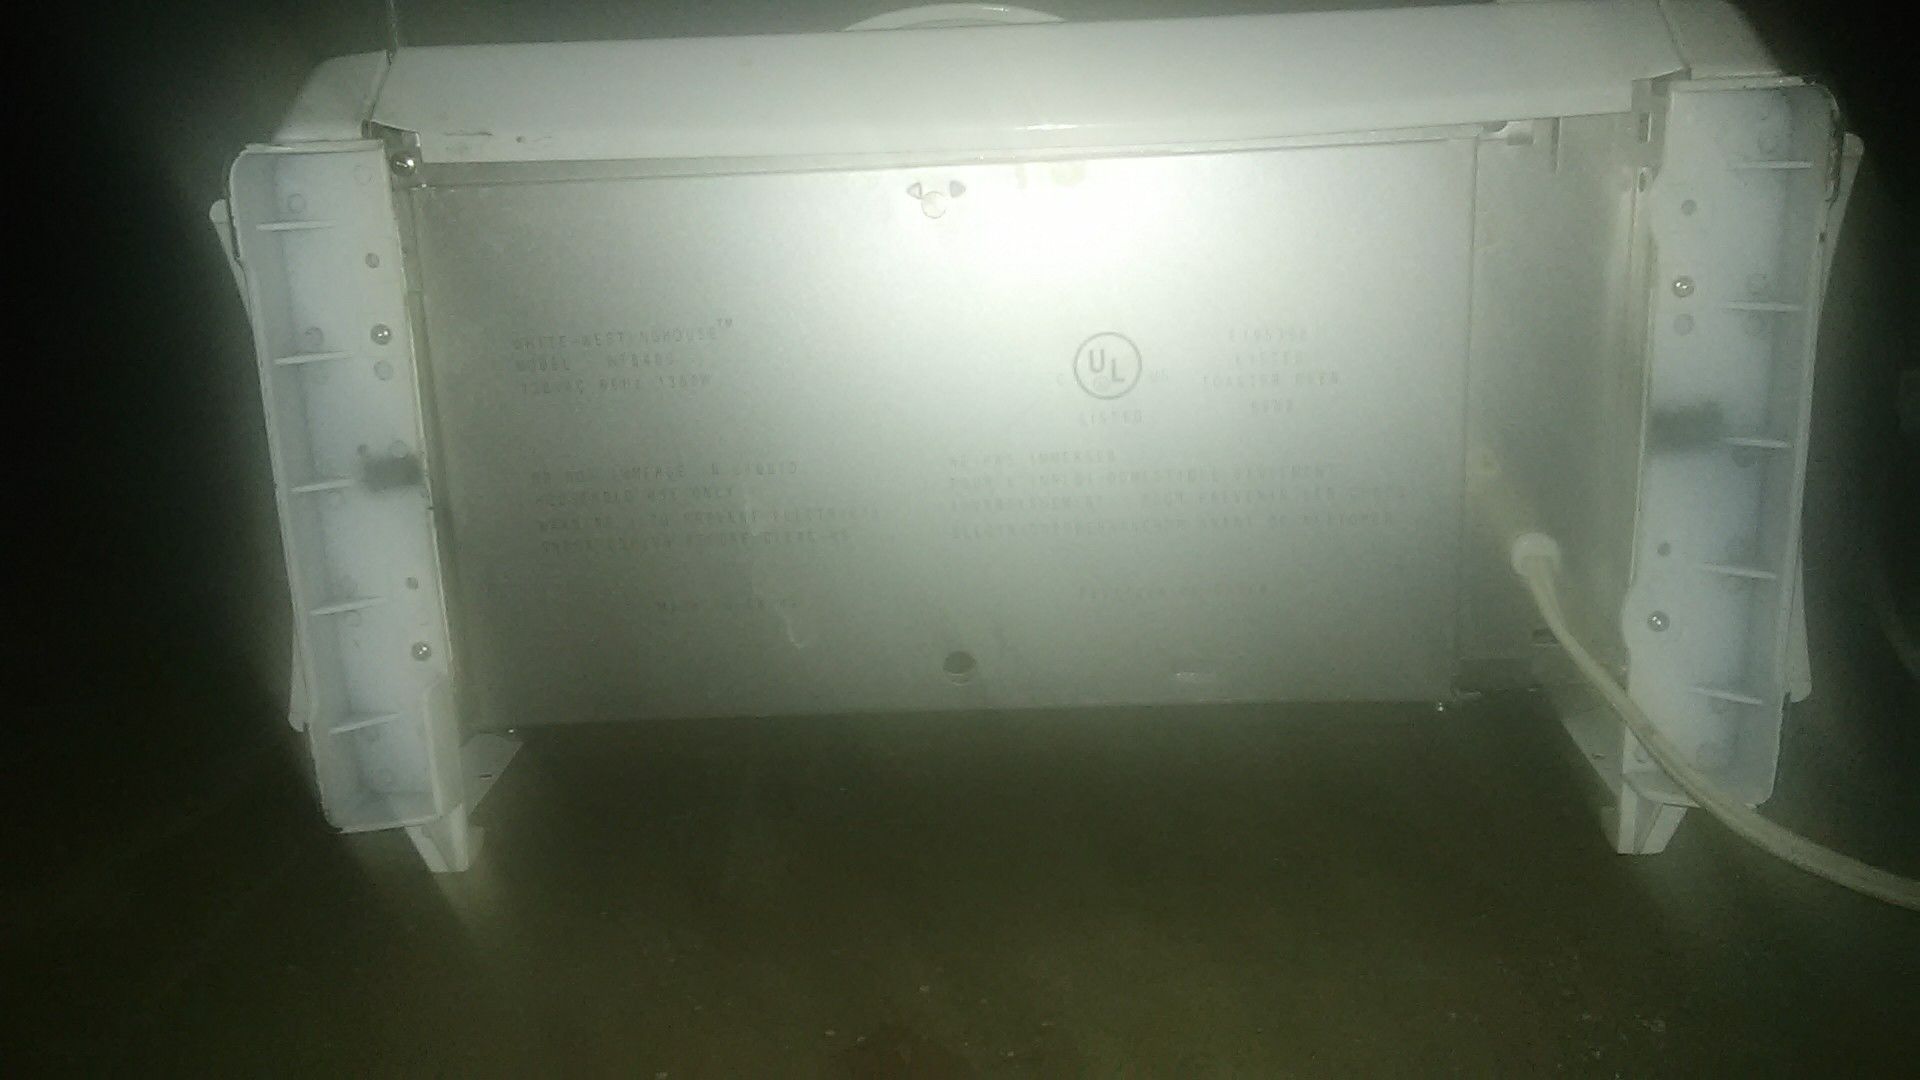 White-Westinghouse Toaster Oven